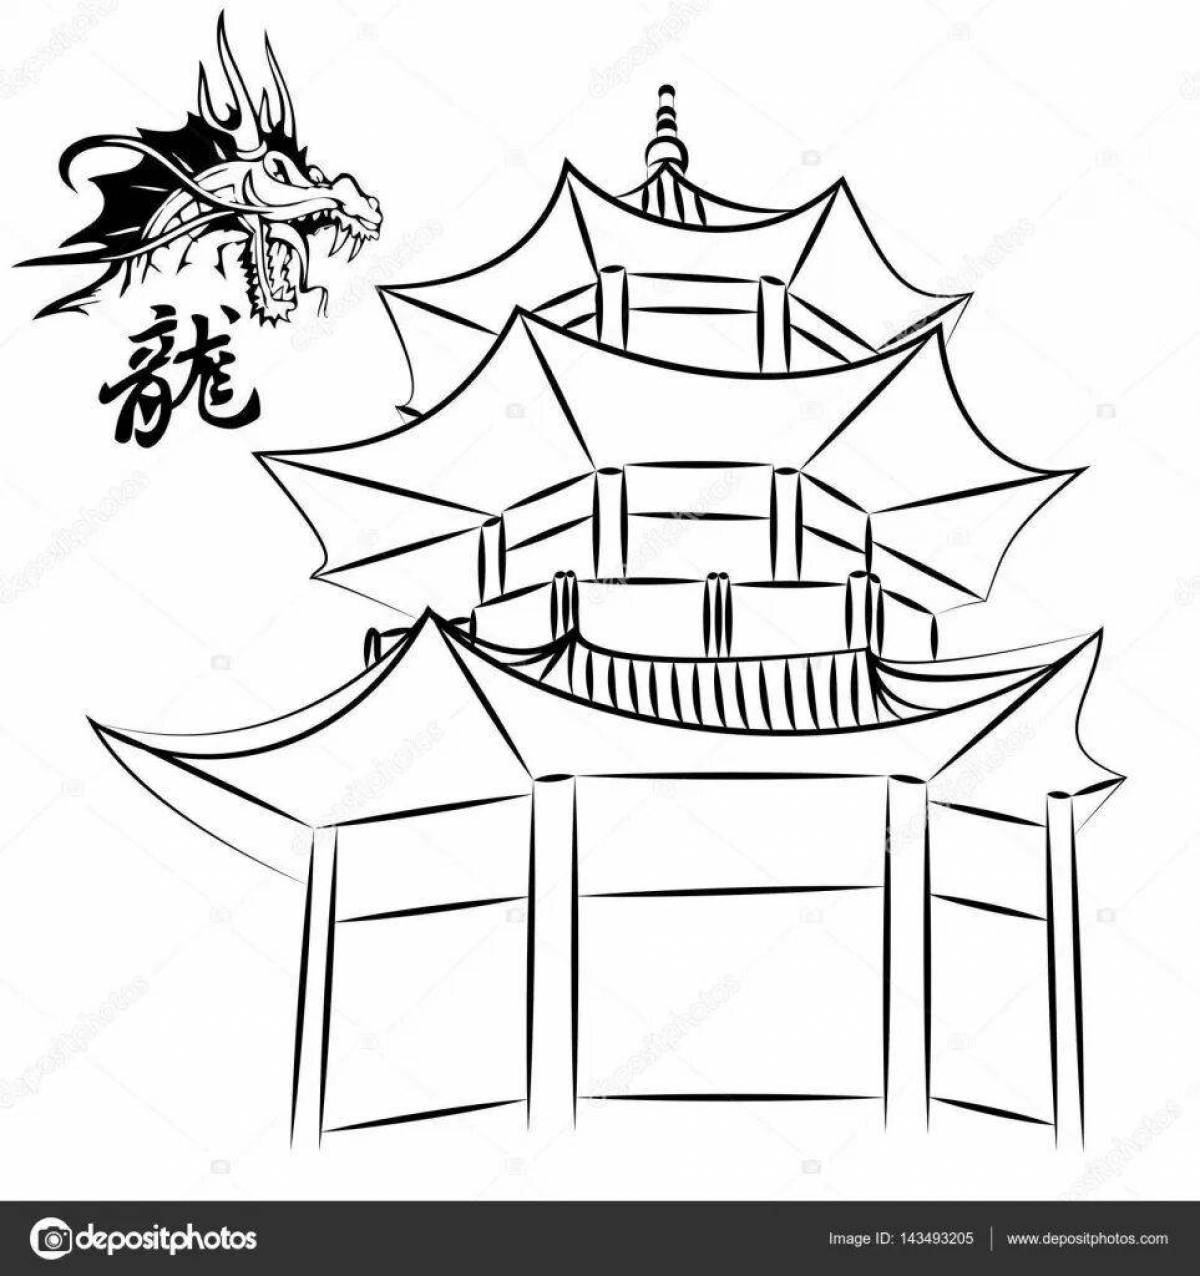 Coloring book shining chinese house